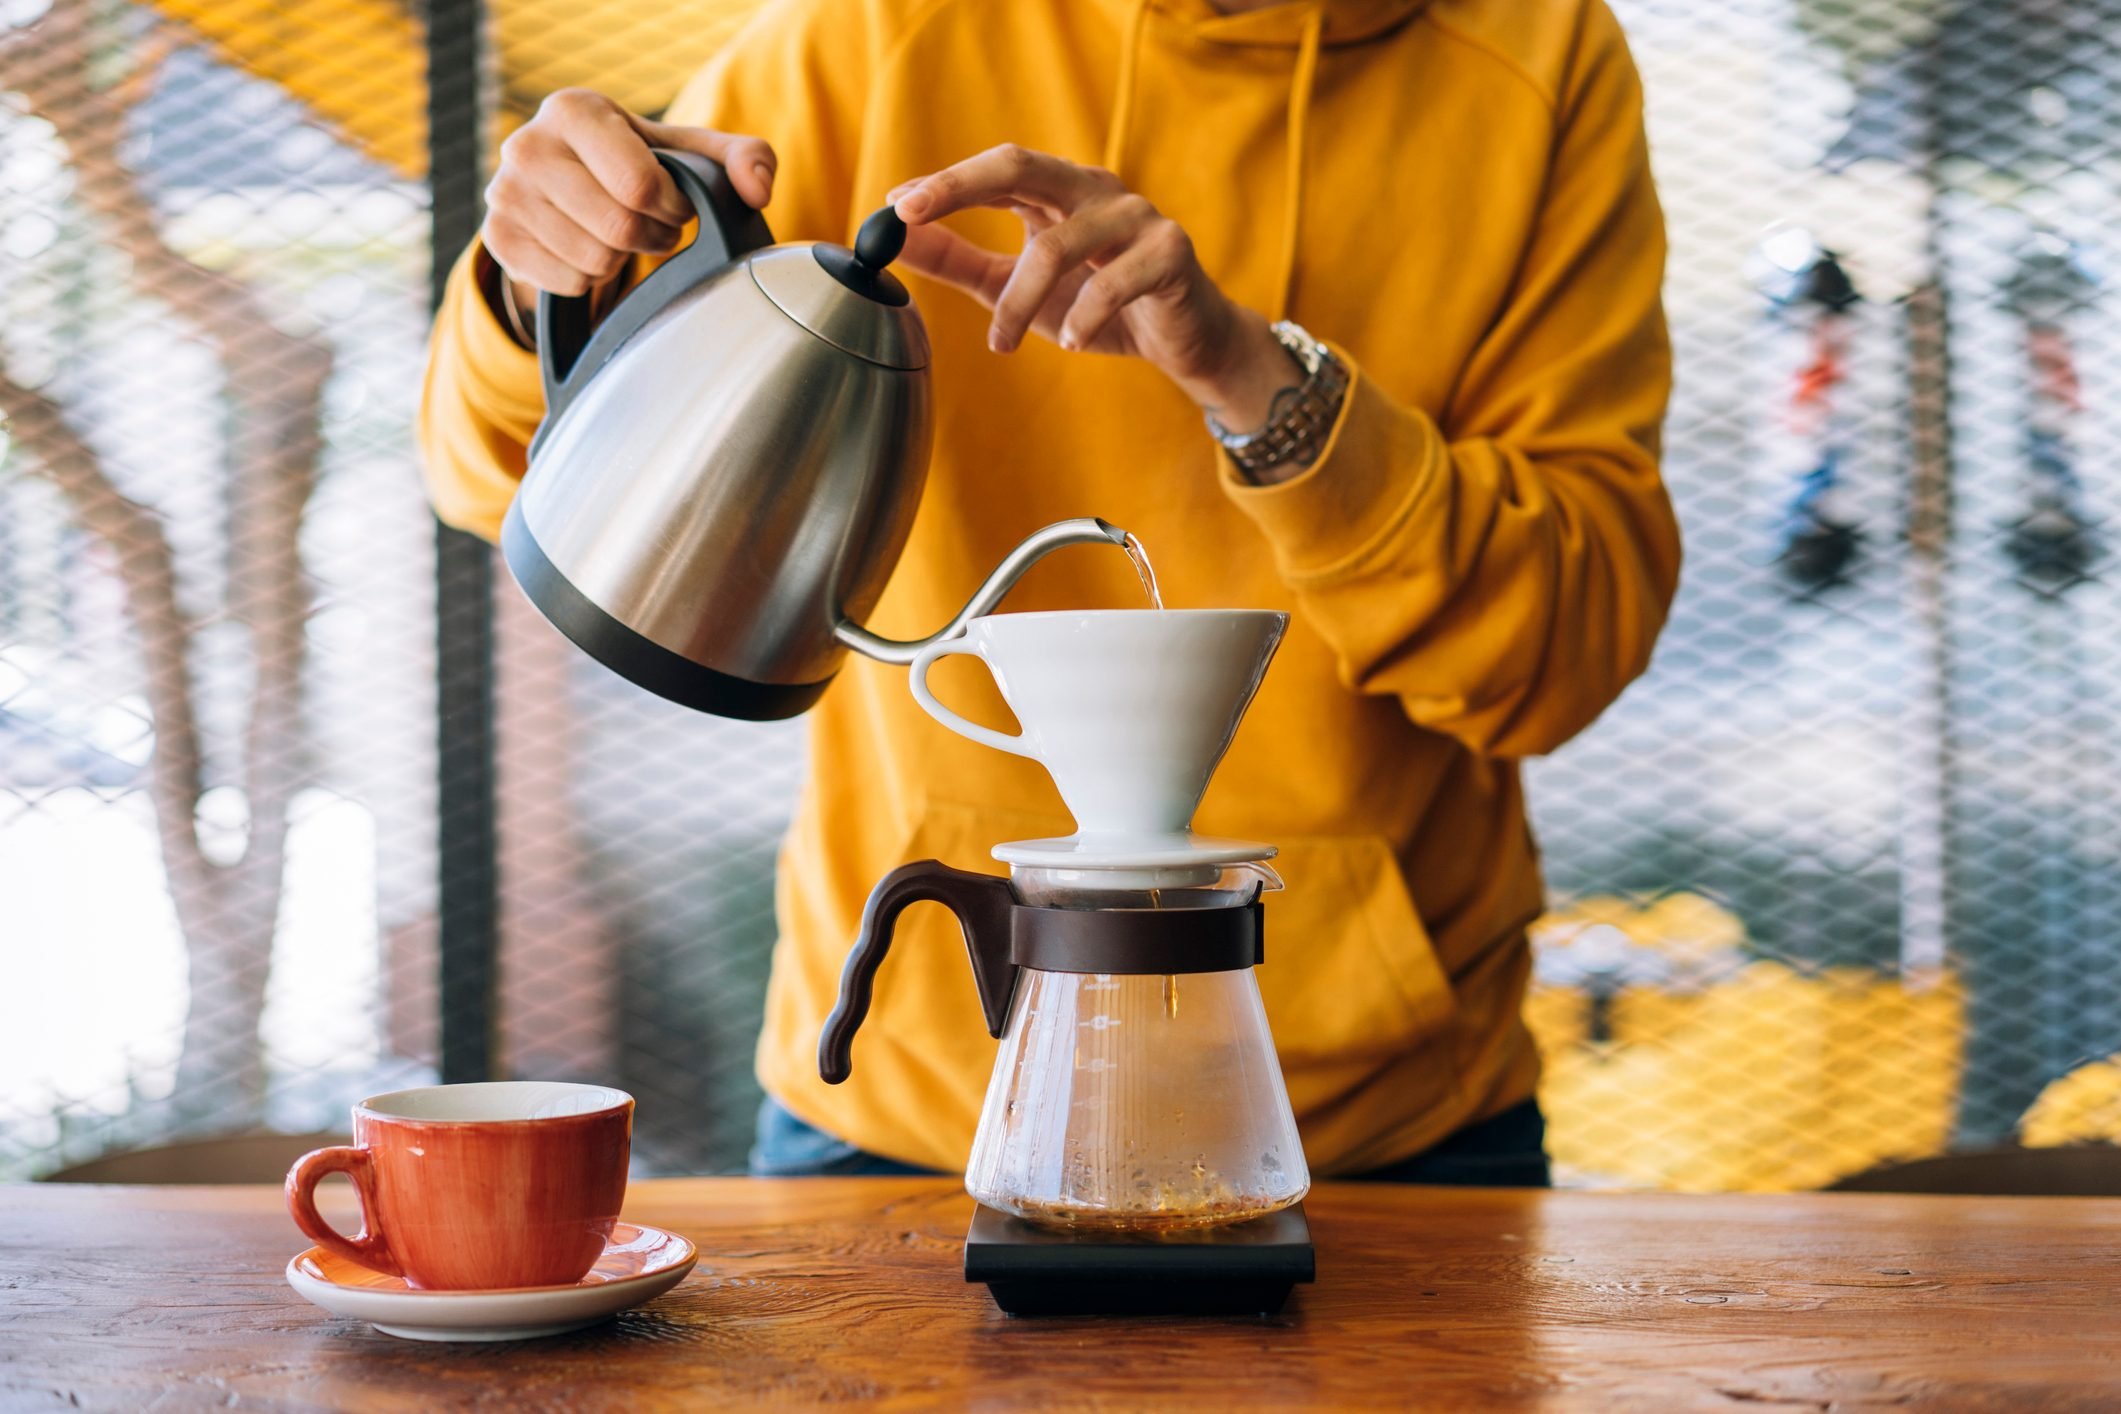 Best pour-over coffee makers, according to experts